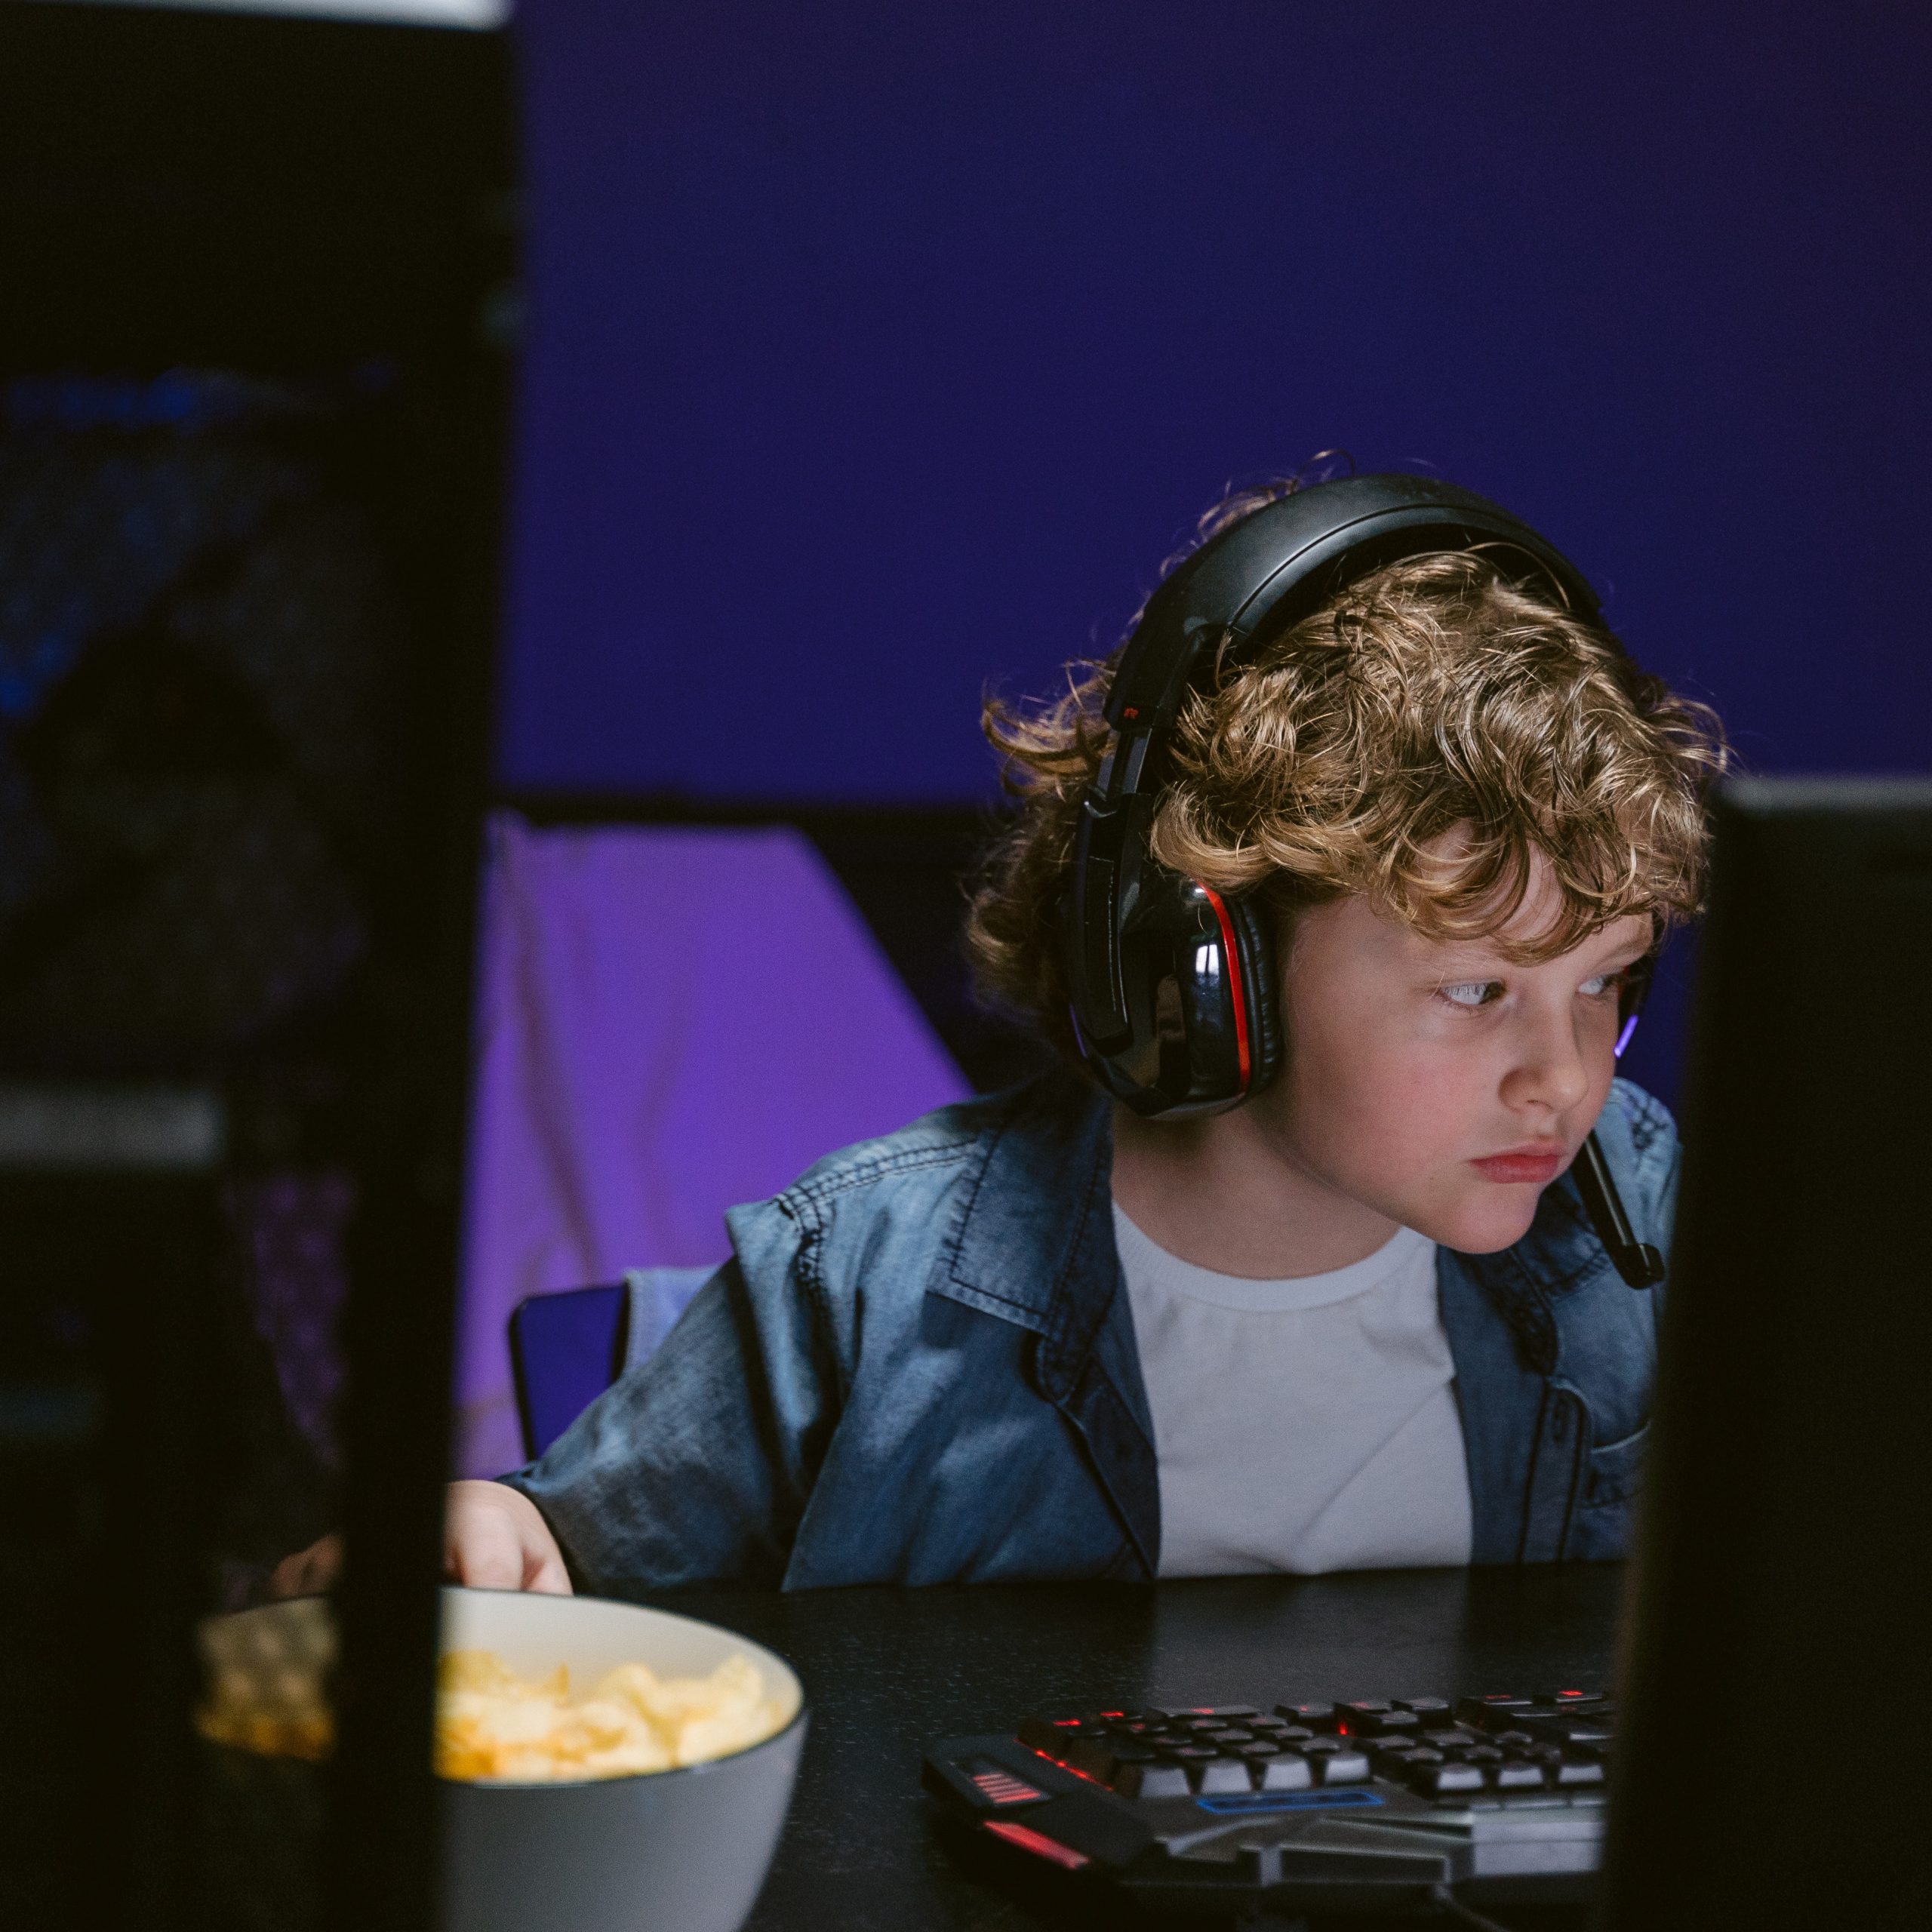 What can you do to prevent your child from spending too much time in front of the computer?